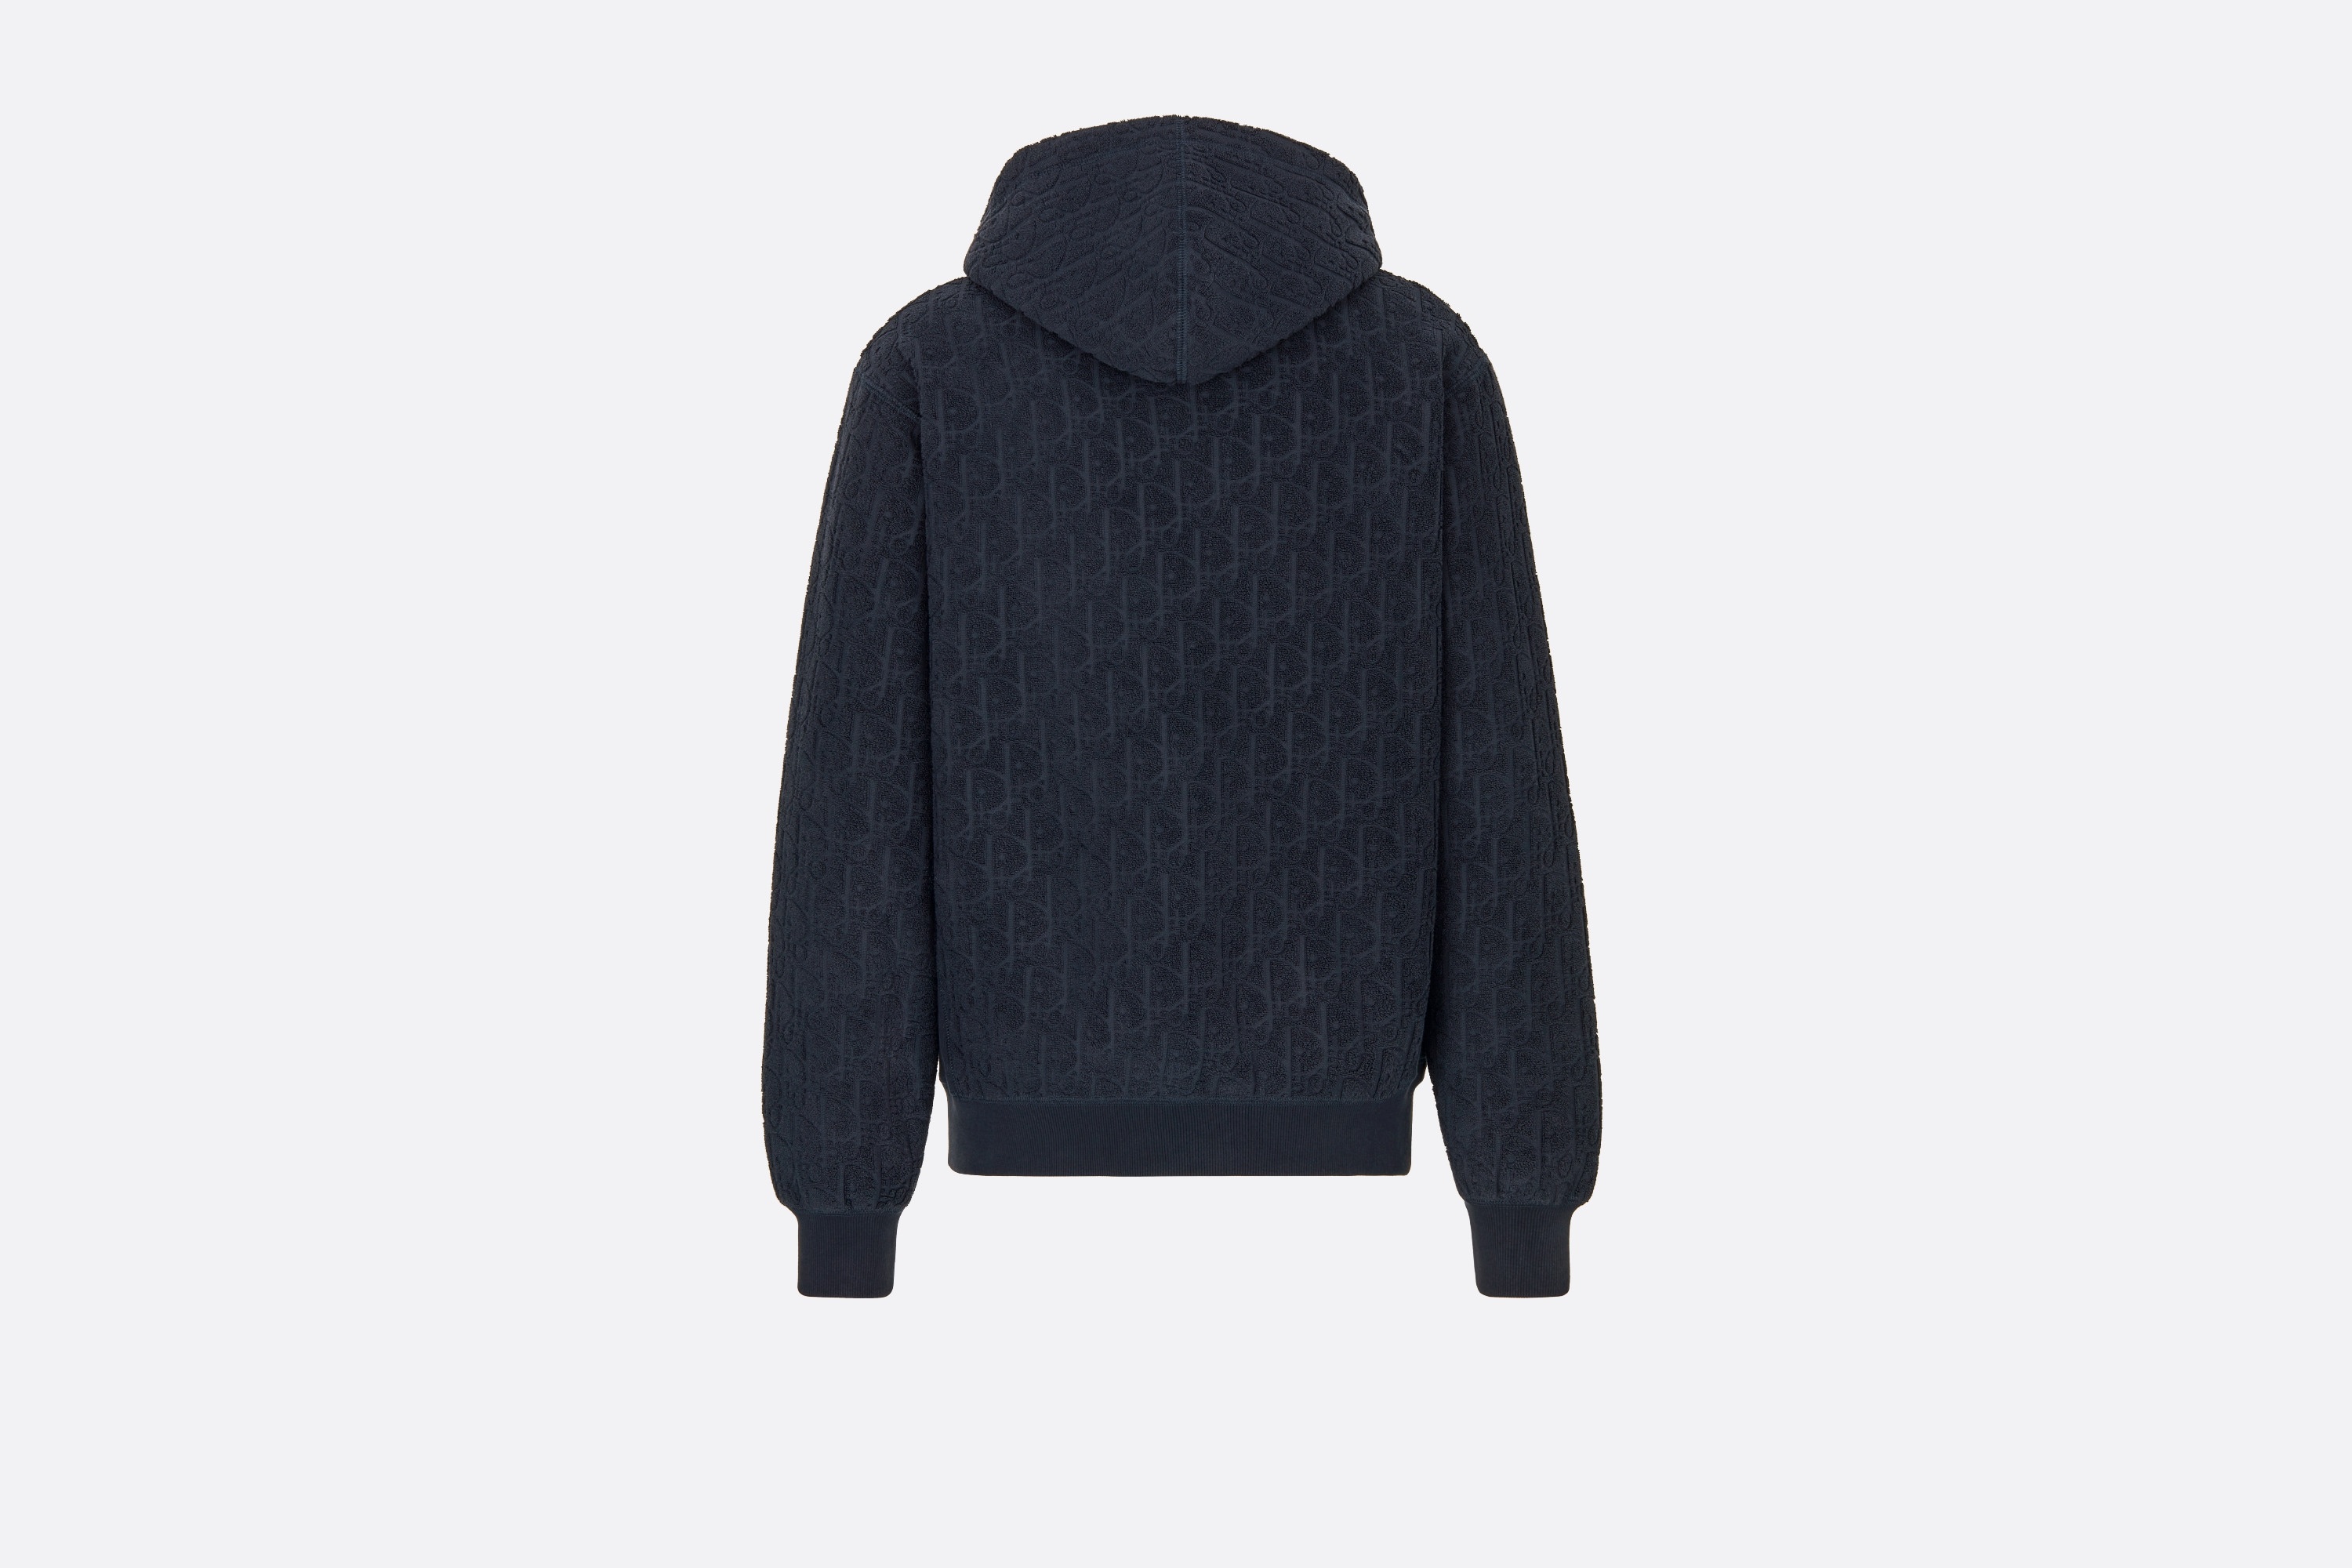 Dior Oblique Relaxed-Fit Hooded Sweatshirt - 2